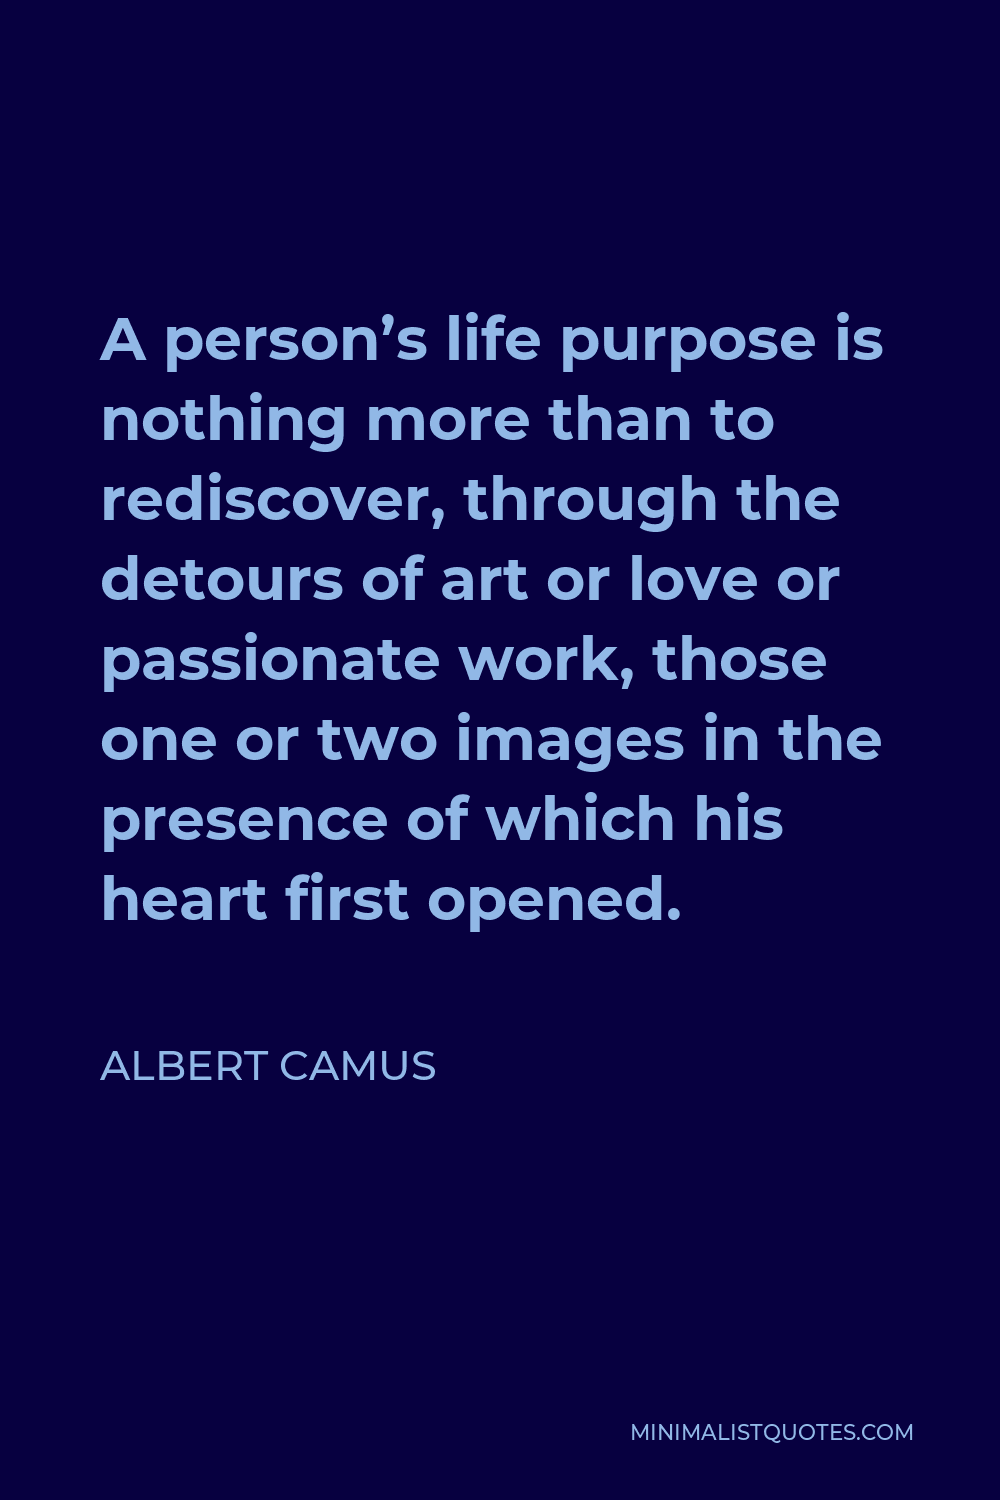 Albert Camus Quote - A person’s life purpose is nothing more than to rediscover, through the detours of art or love or passionate work, those one or two images in the presence of which his heart first opened.